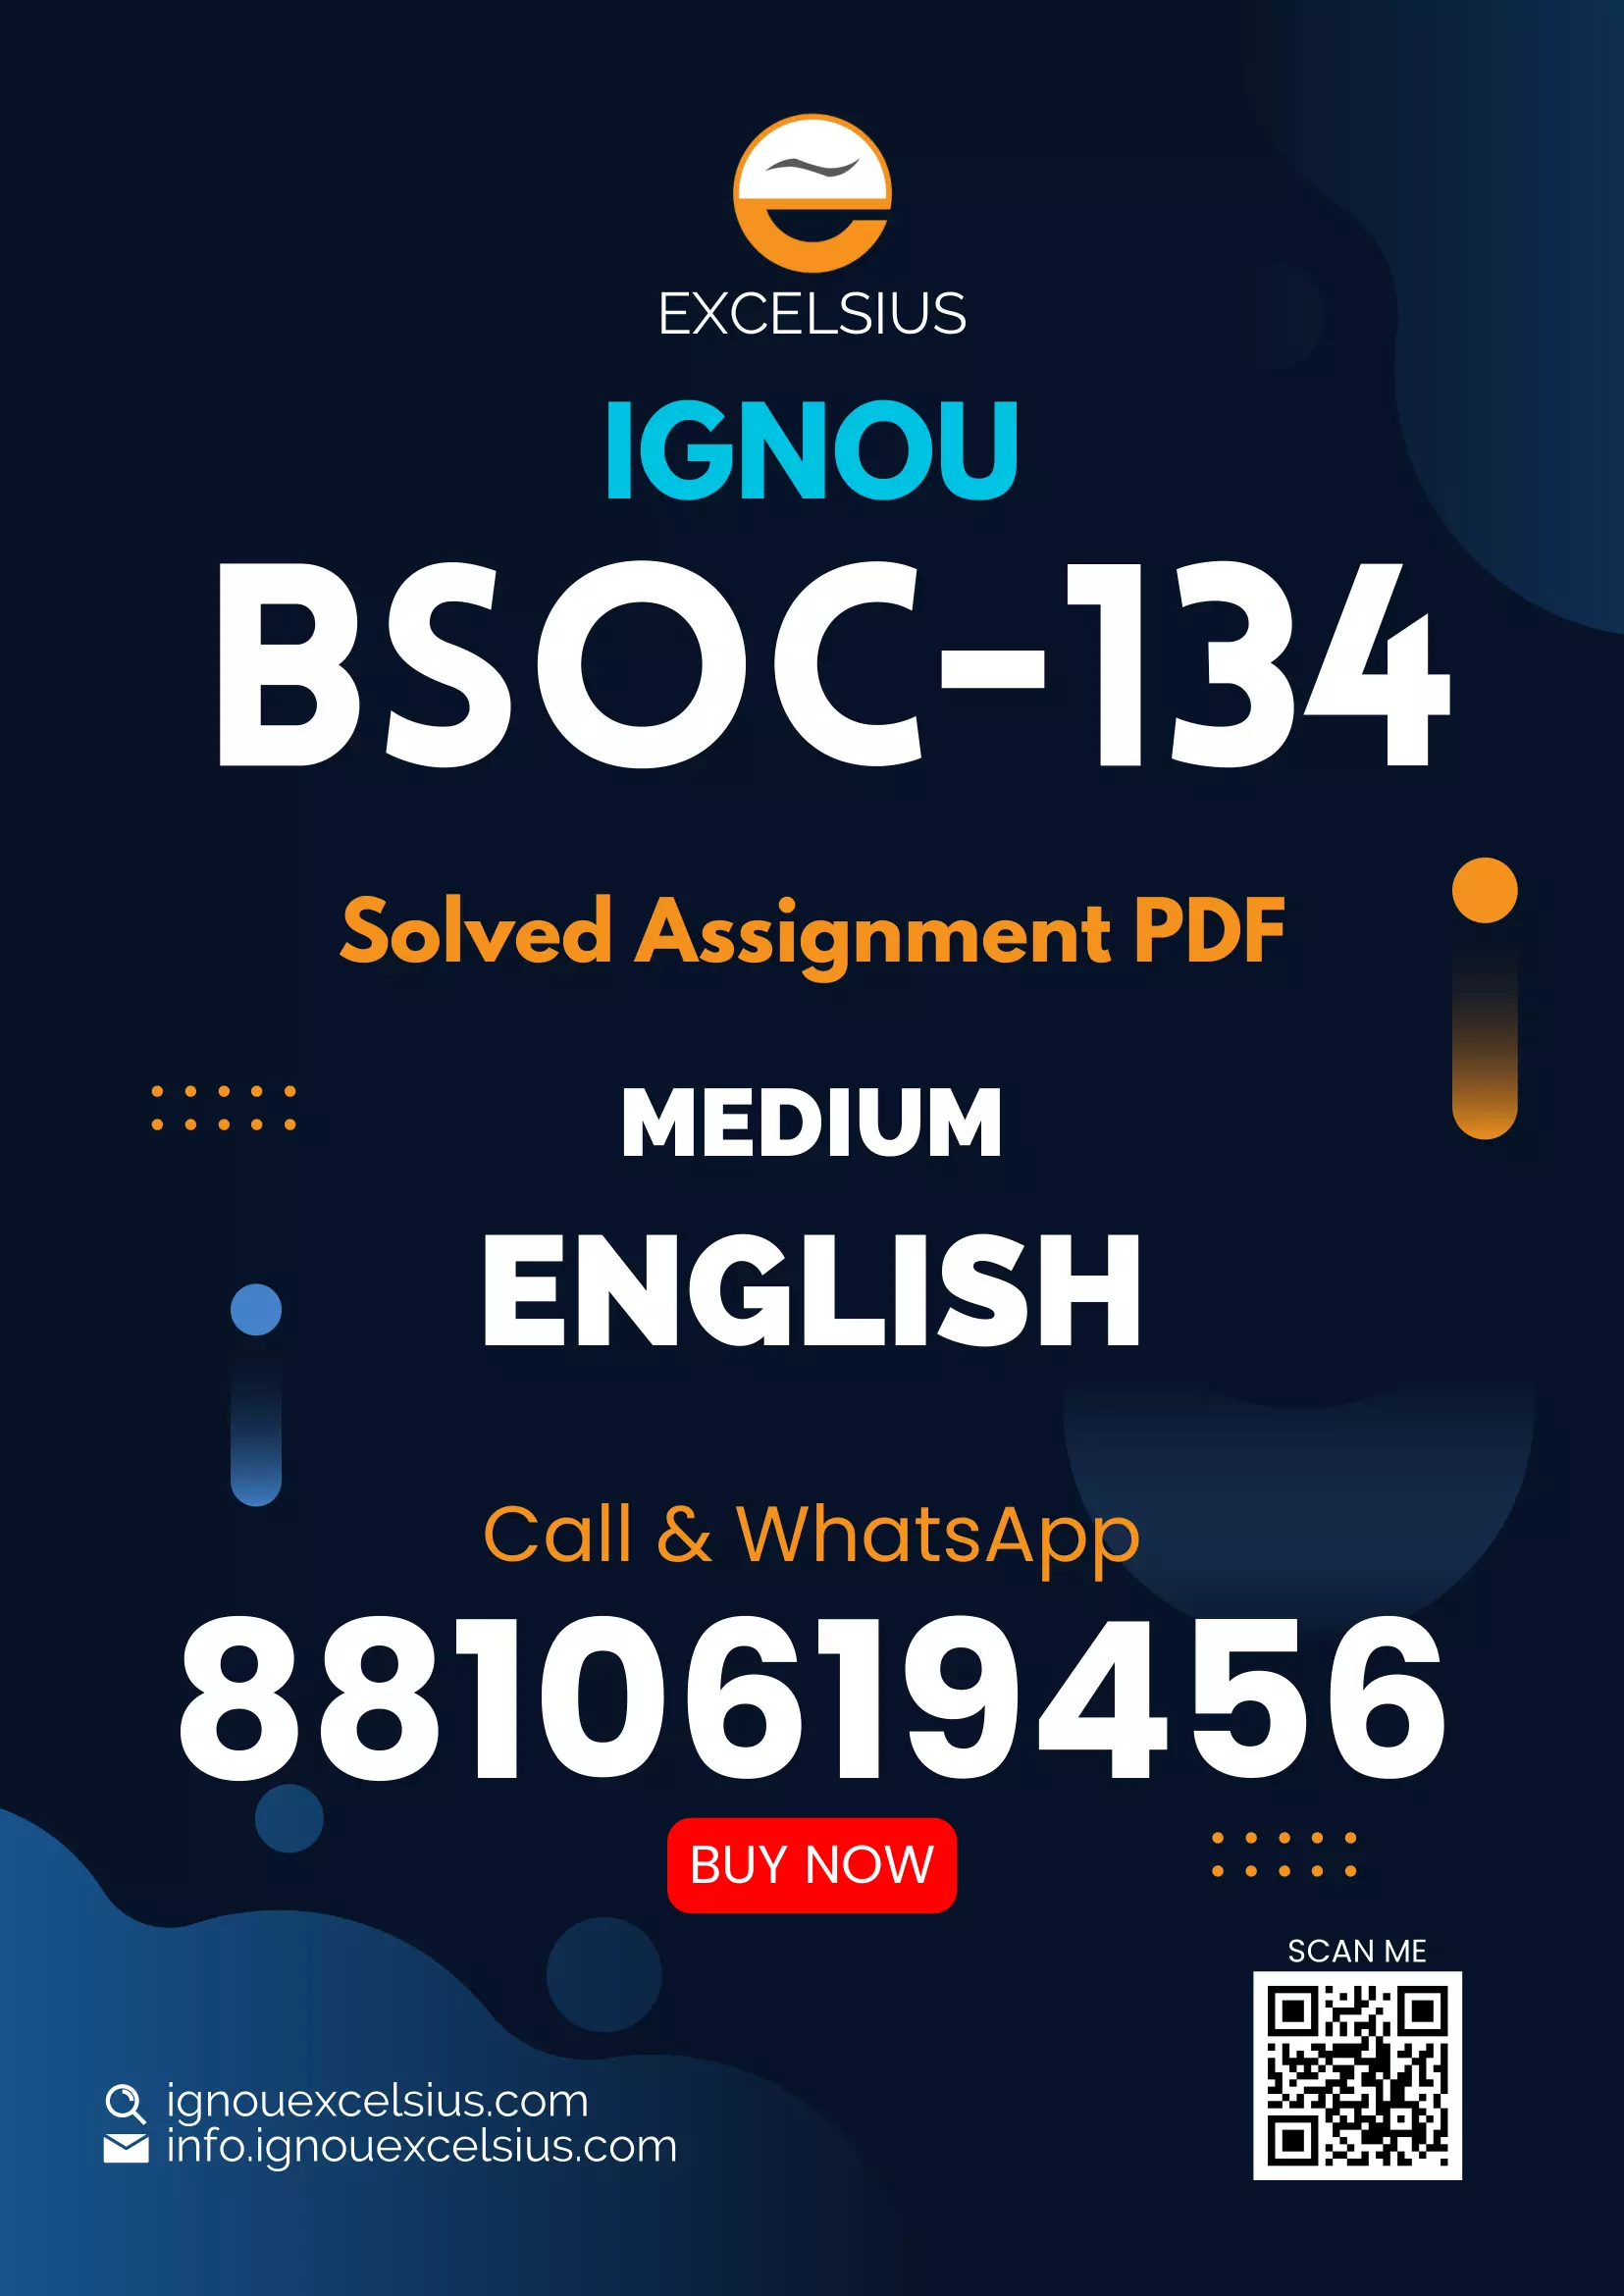 IGNOU BSOC-134 - Methods of Sociological Enquiry, Latest Solved Assignment-July 2022 – January 2023